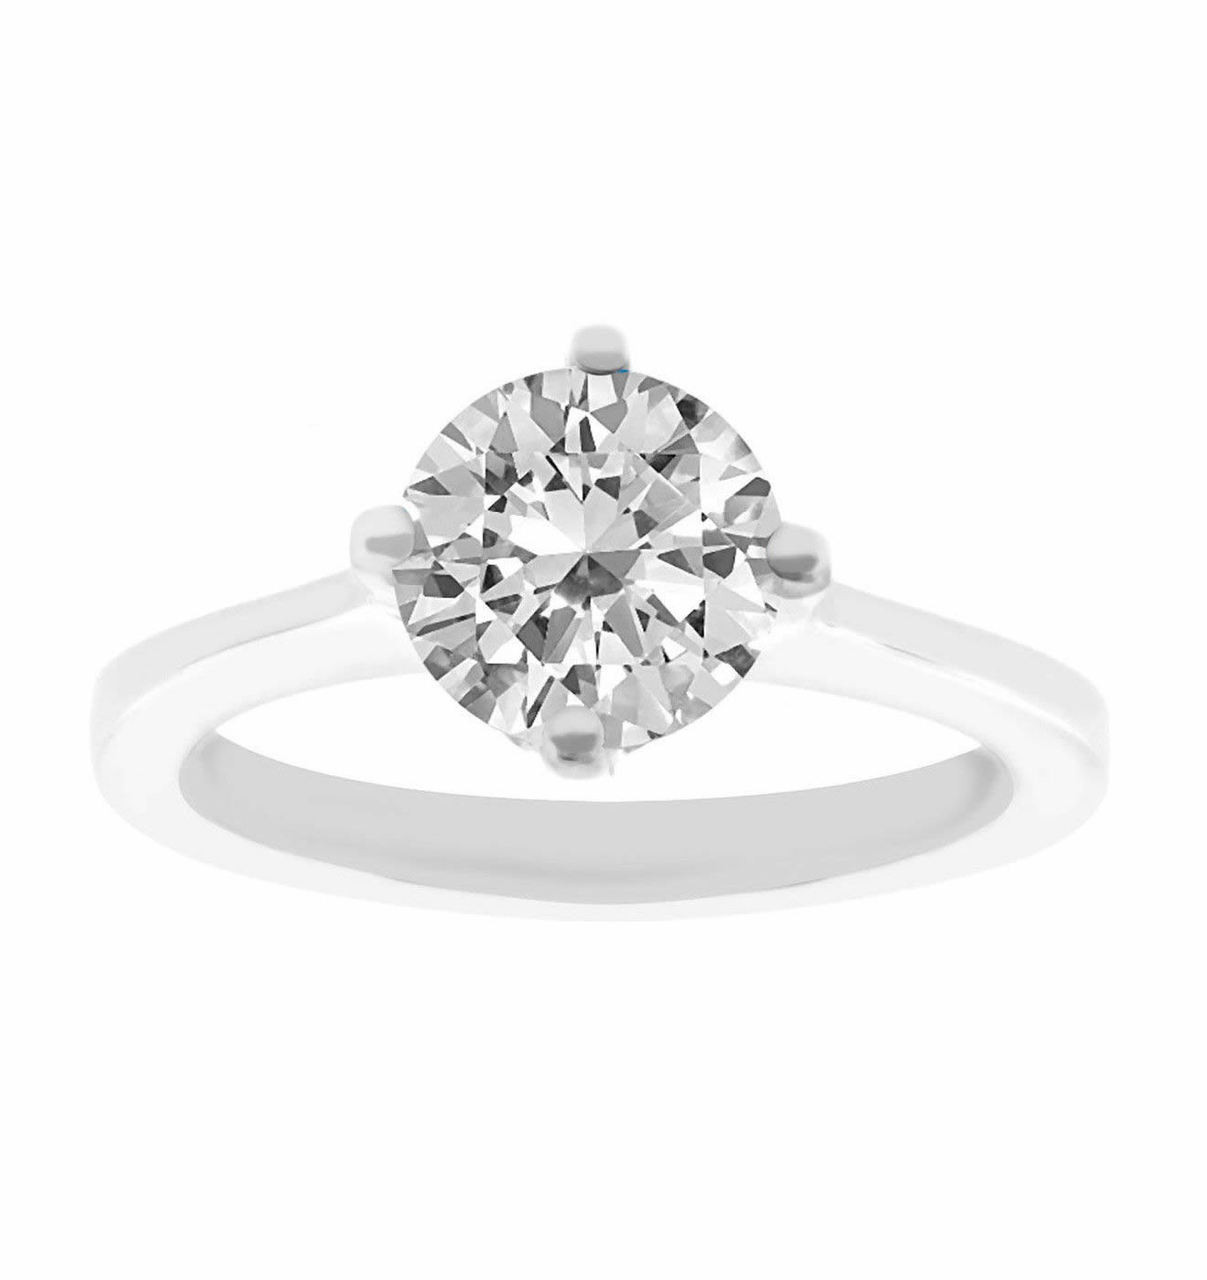 Diamond Ring Designs for Female with Price - JD SOLITAIRE